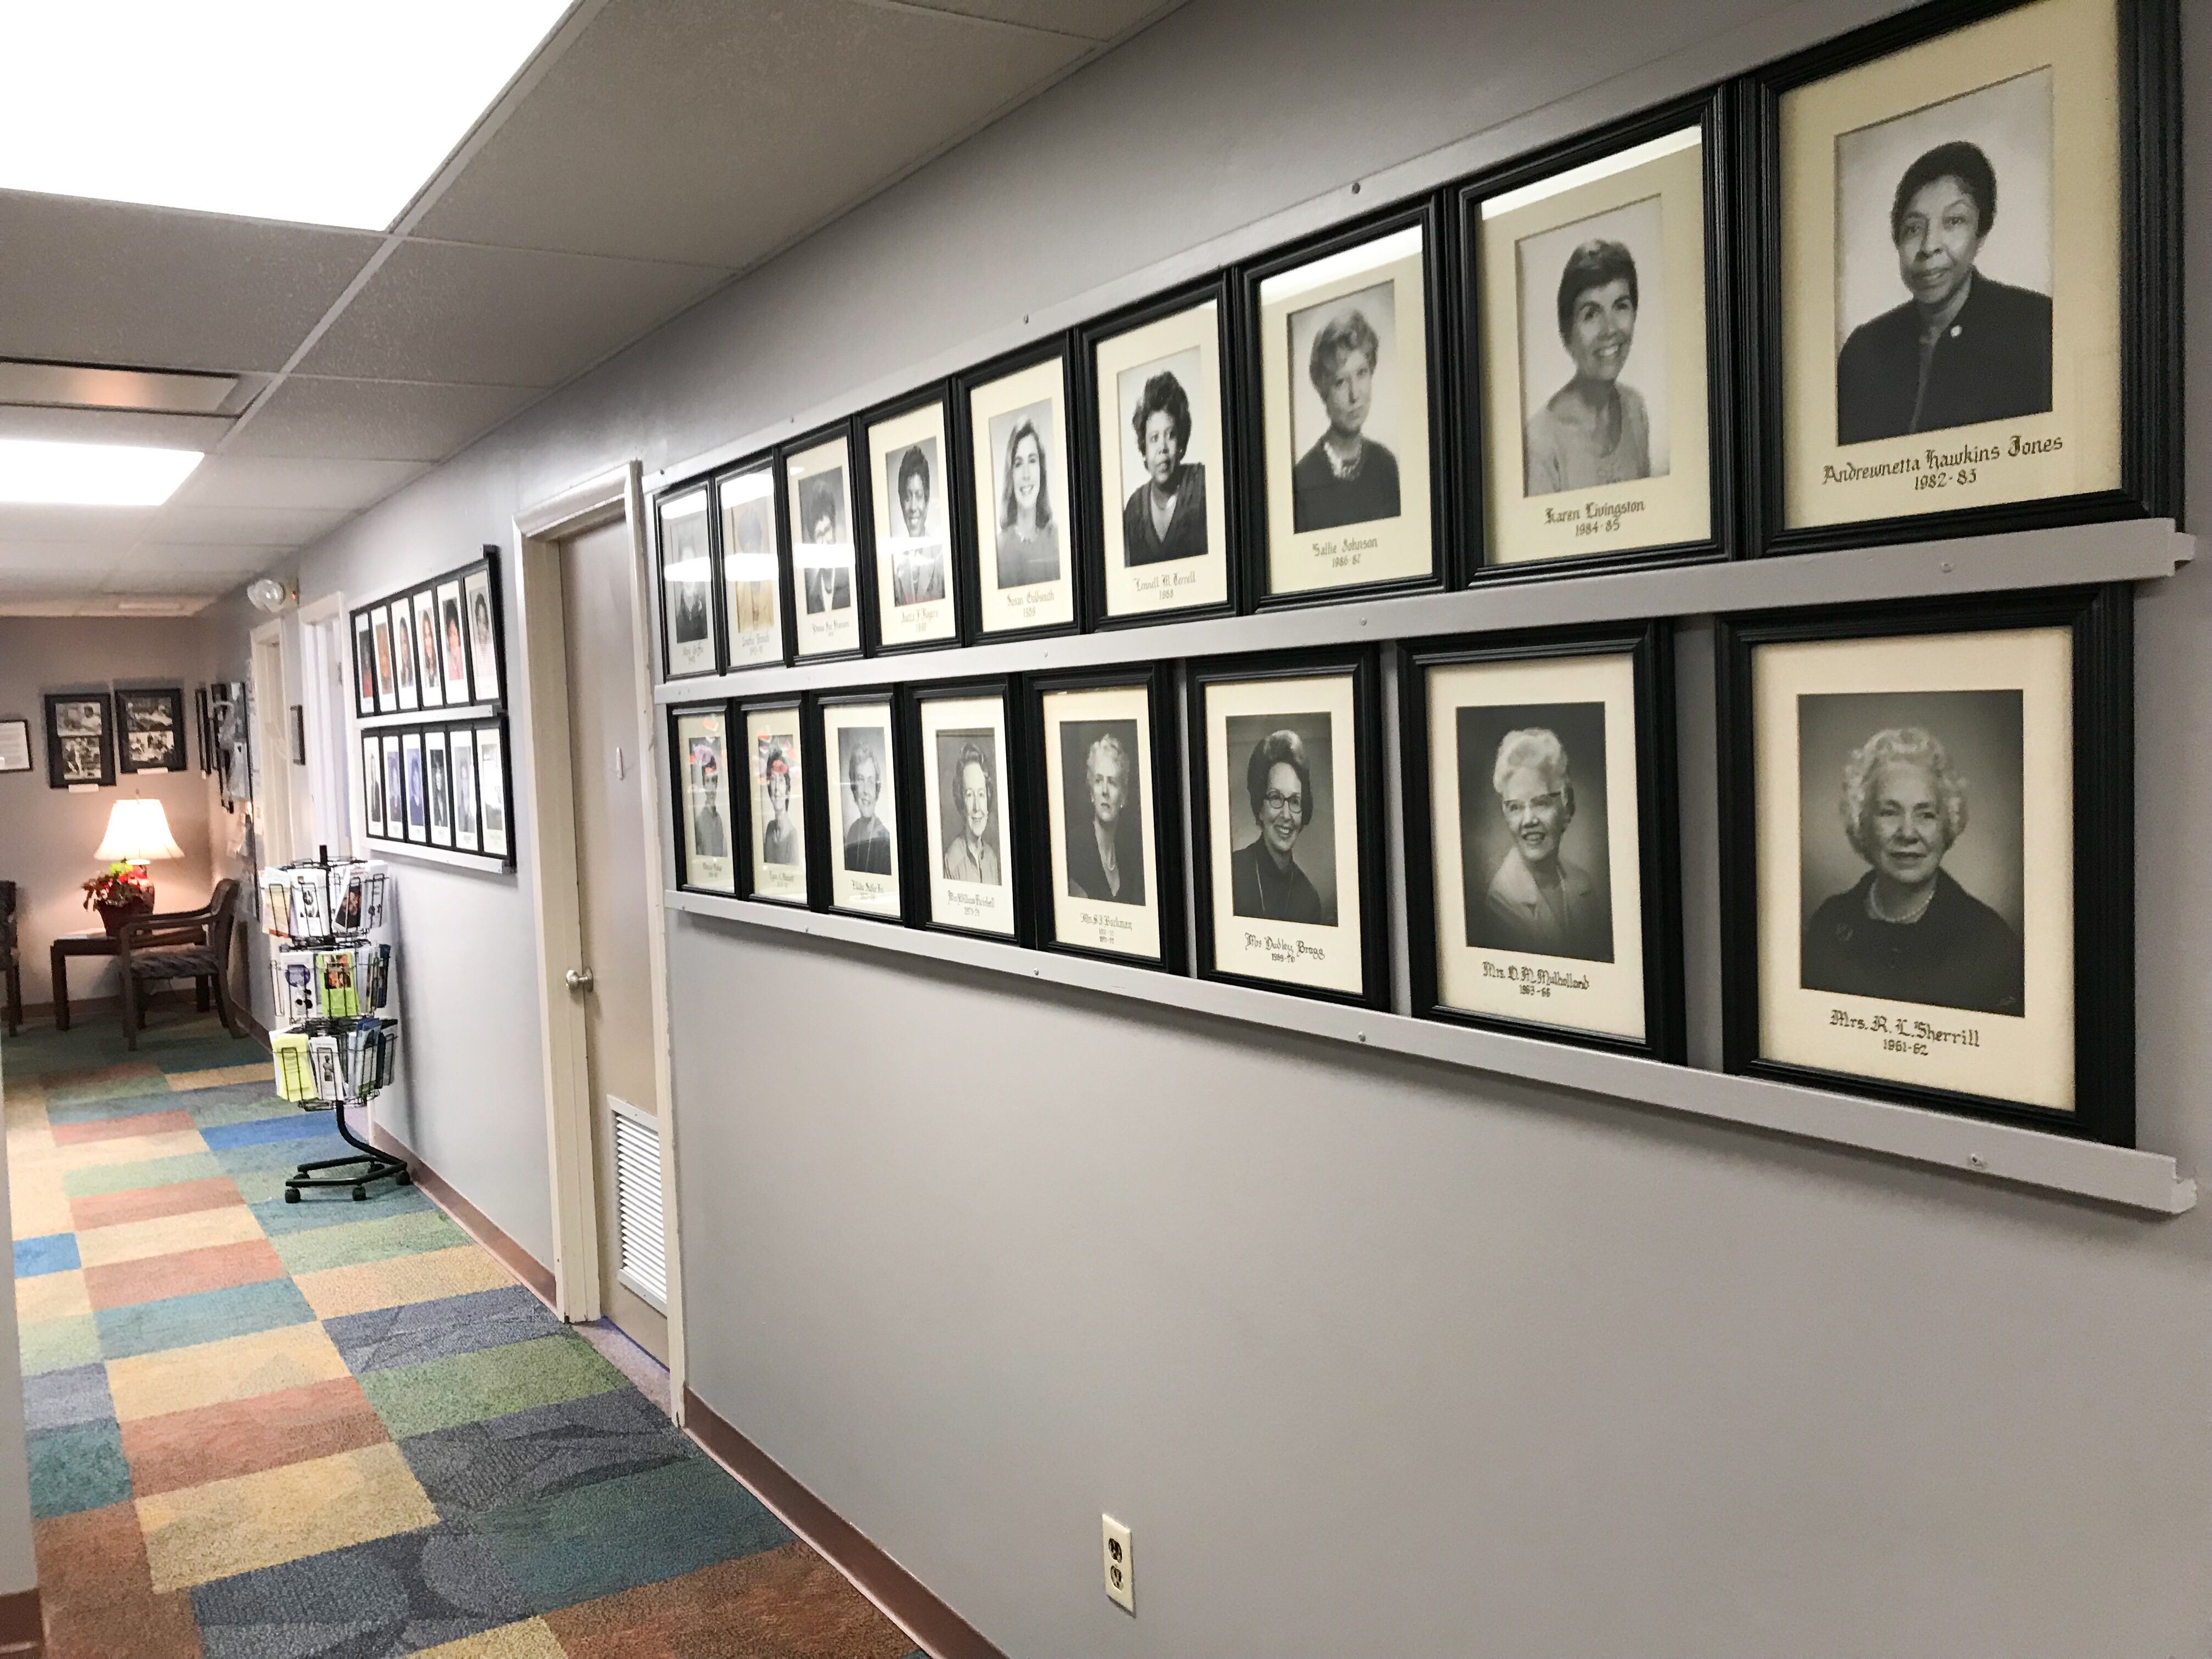 Photos of past board members line the walls of the YWCA of Greater Memphis’ headquarters. The YWCA celebrates its 100th year in Memphis this year. (Cole Bradley)